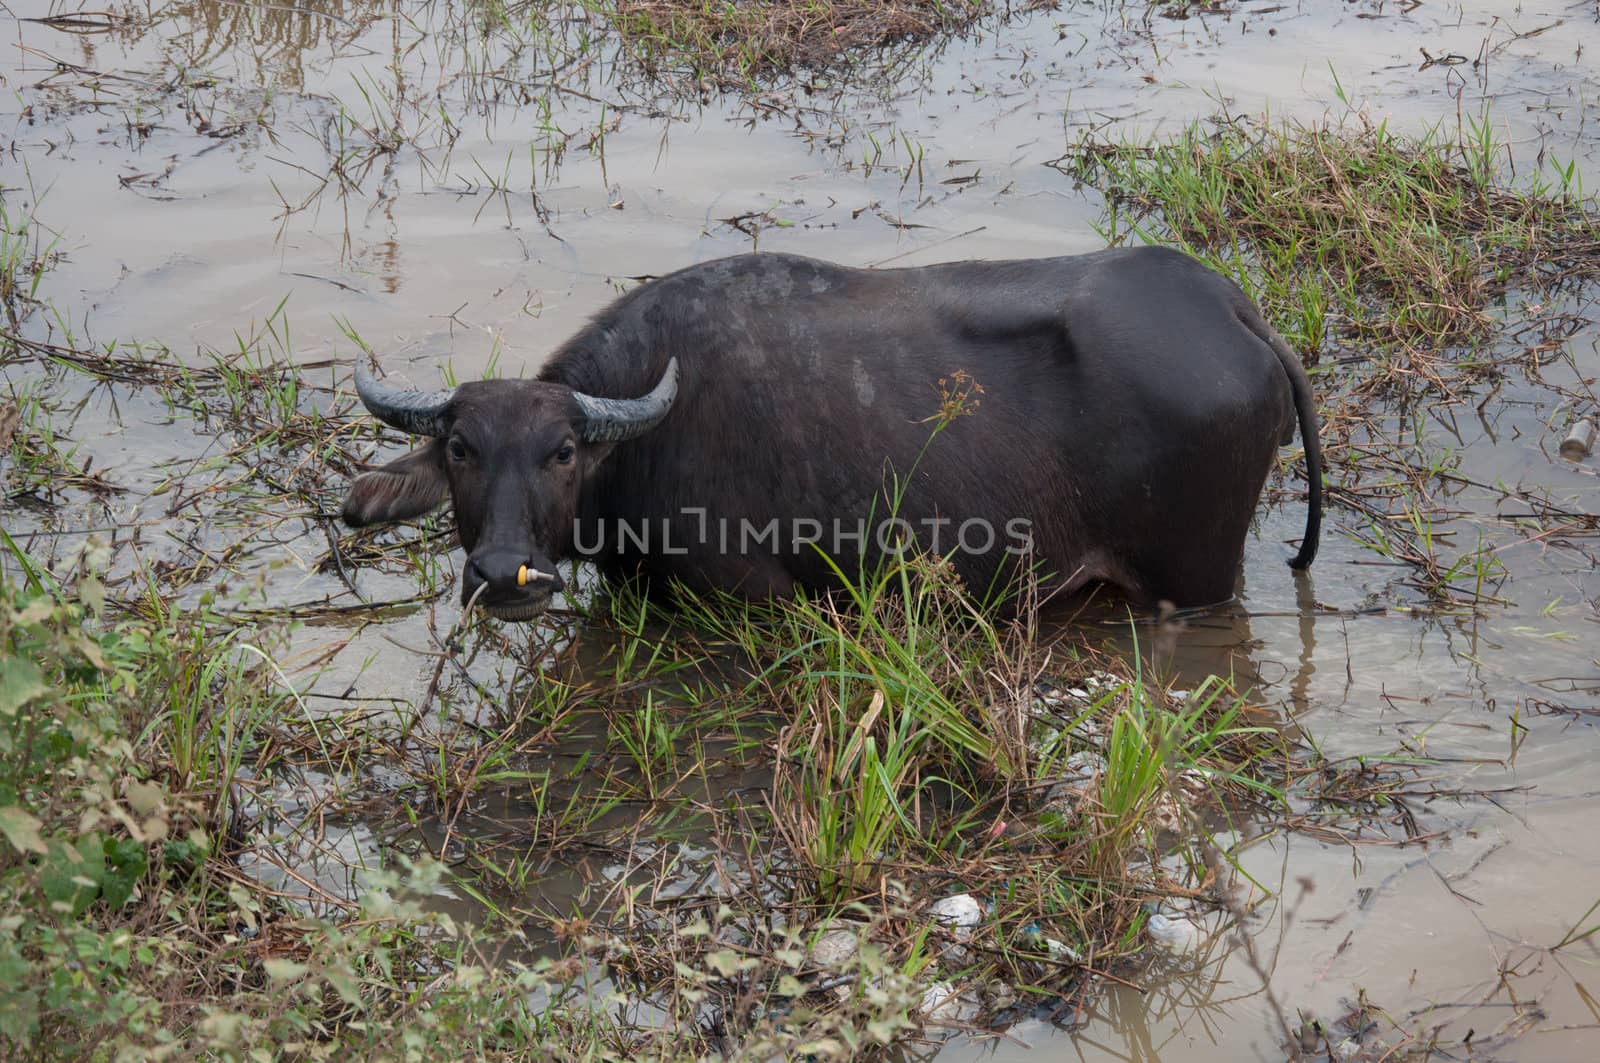 buffalo eats grass in swamp by ngarare